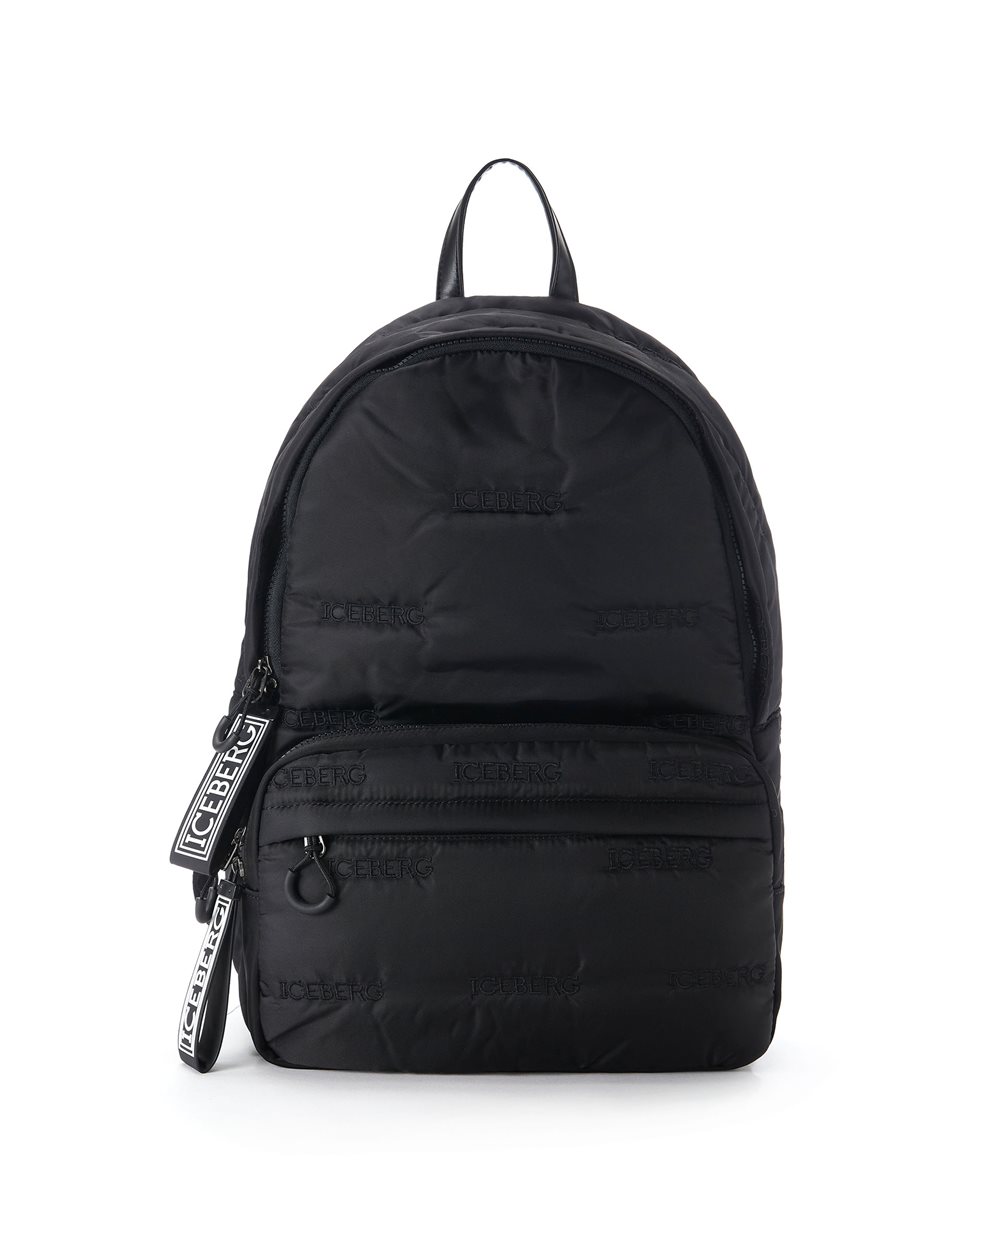 Nylon backpack with allover logo - ( SECONDO STEP IT ) PROMO SALDI UP TO 50% | Iceberg - Official Website